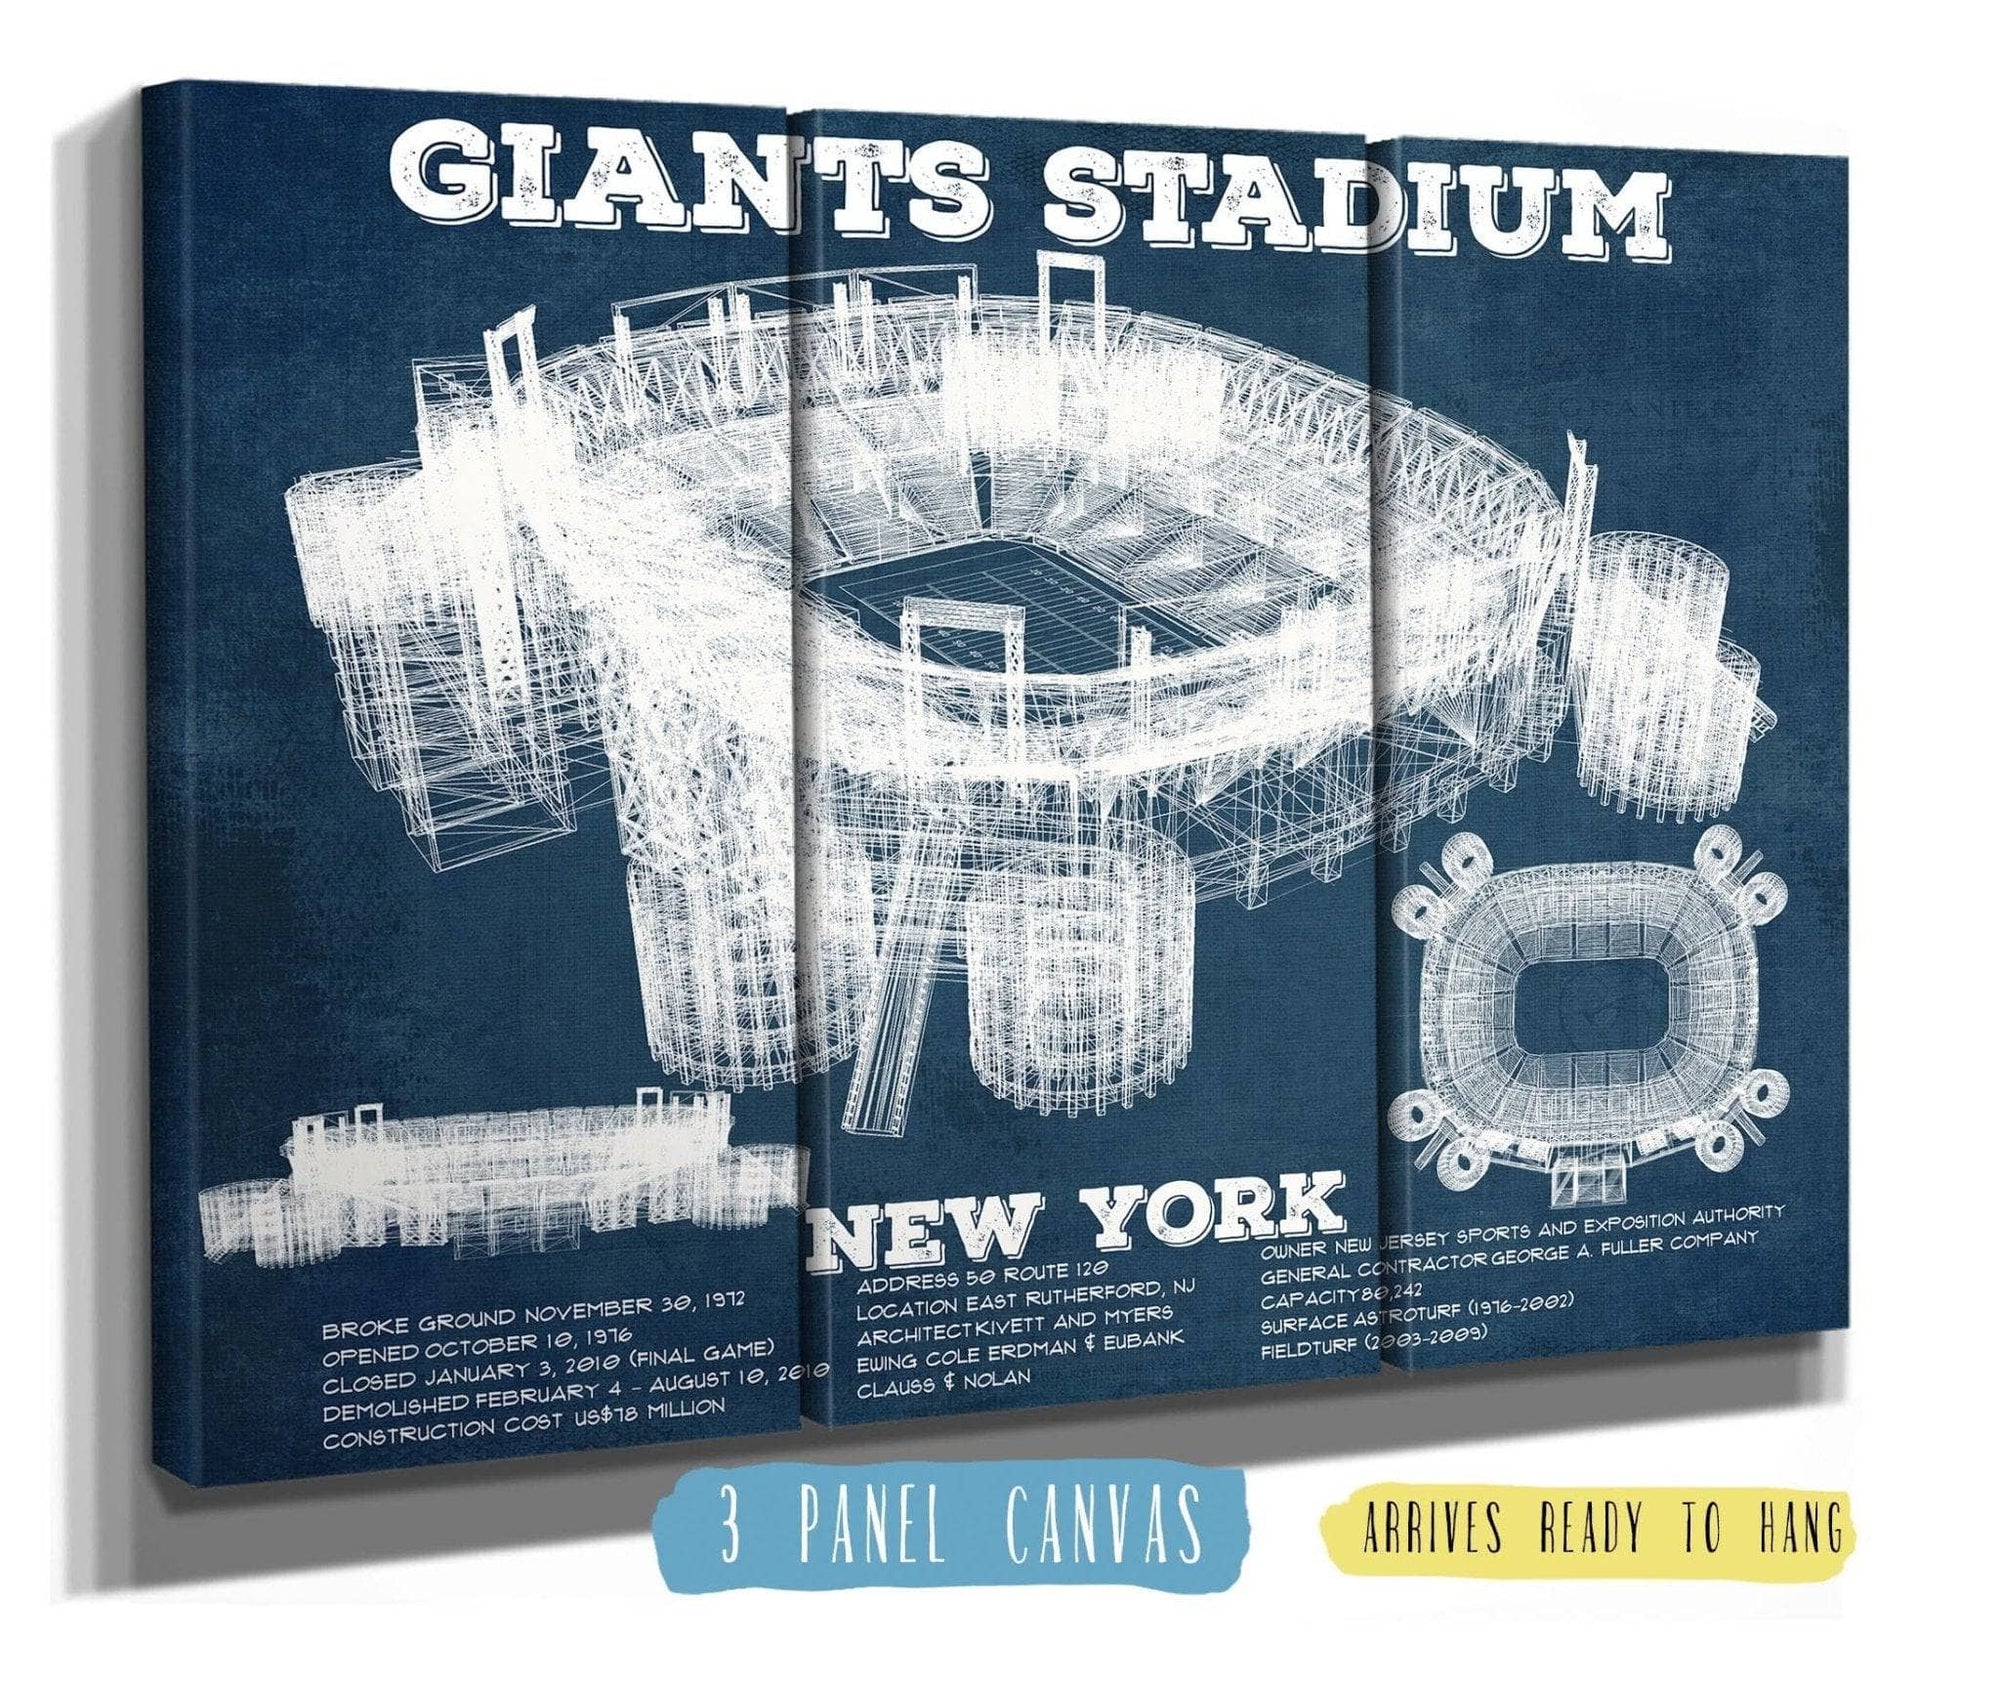 Cutler West Pro Football Collection 48" x 32" / 3 Panel Canvas Wrap Giants Stadium - The Meadowlands New York Vintage Print 731428206-TOP